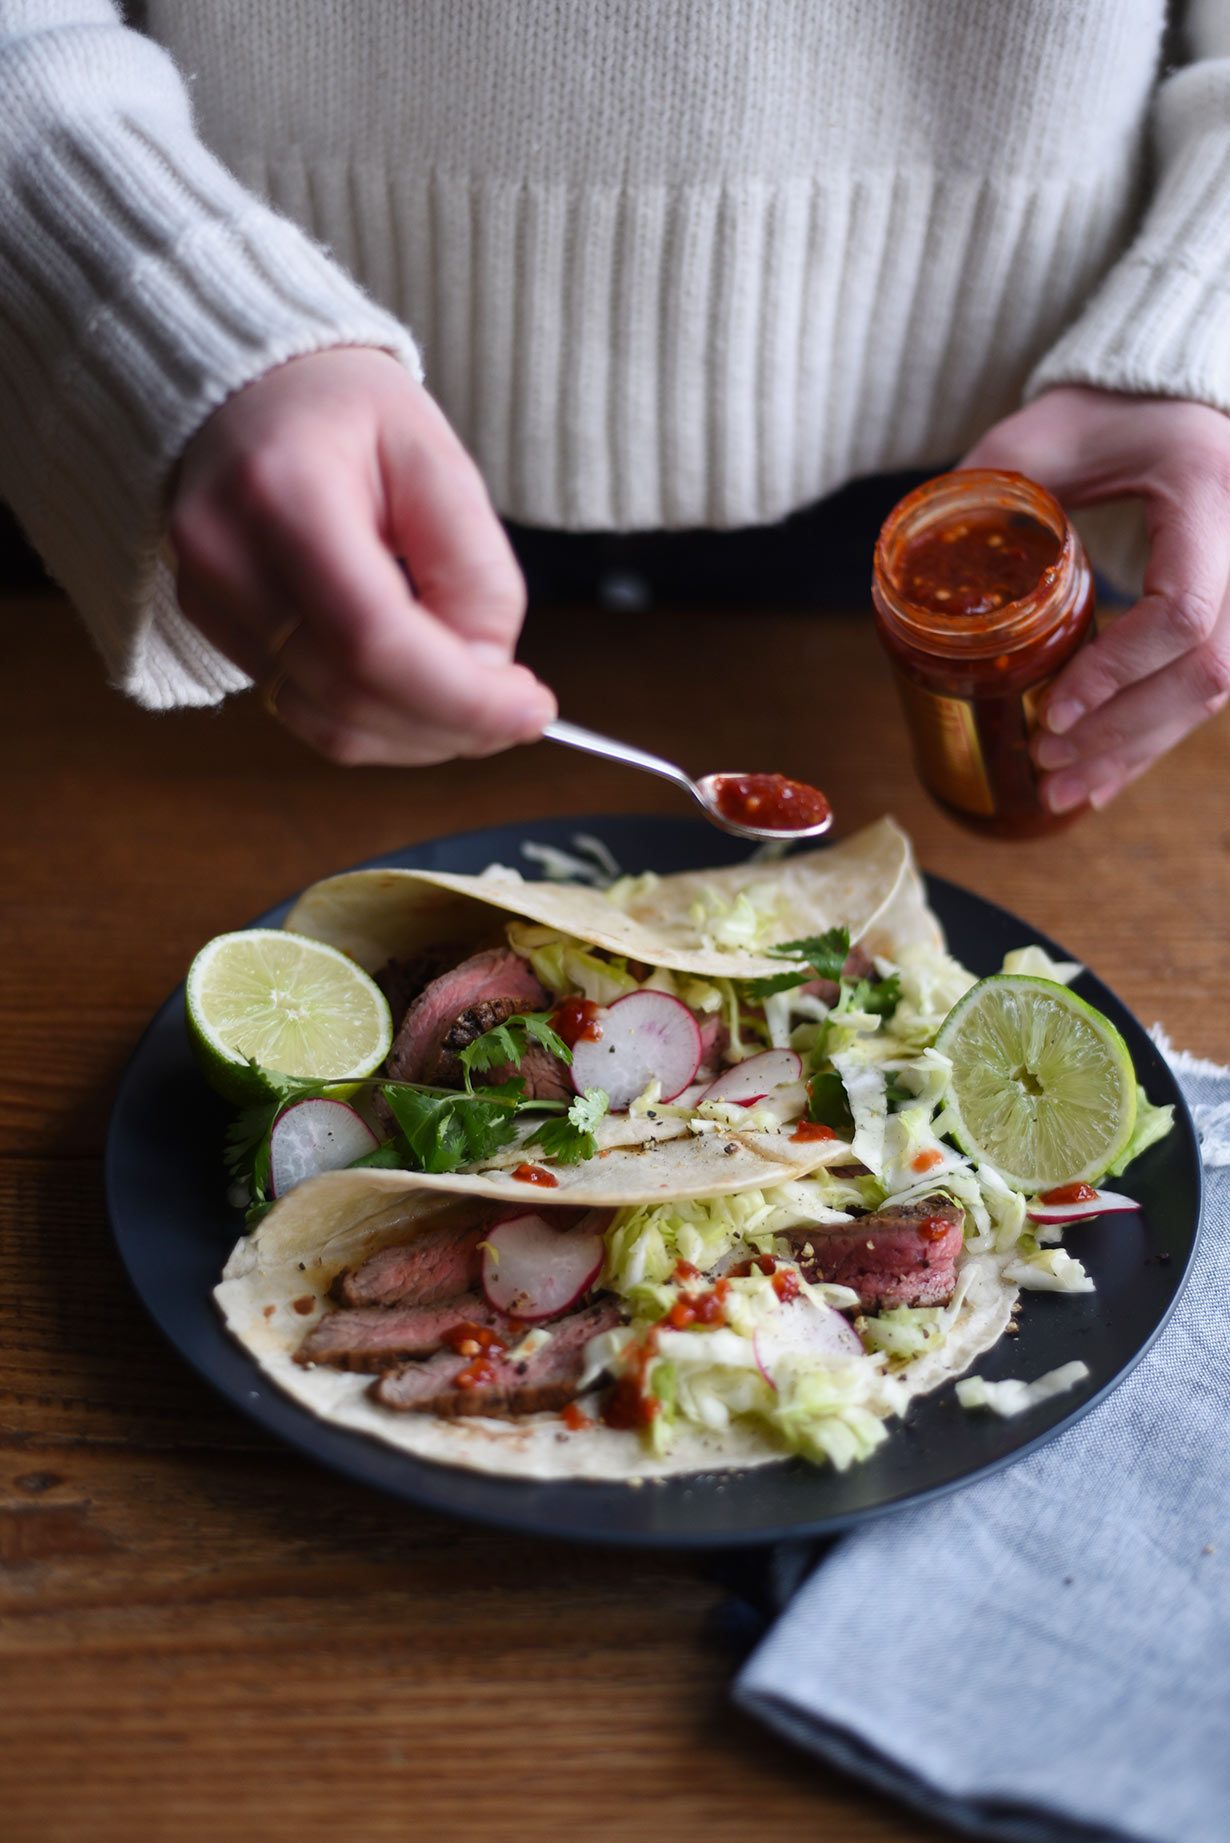 Turntable Kitchen shares an easy recipe for Coffee-Rubbed Steak Tacos